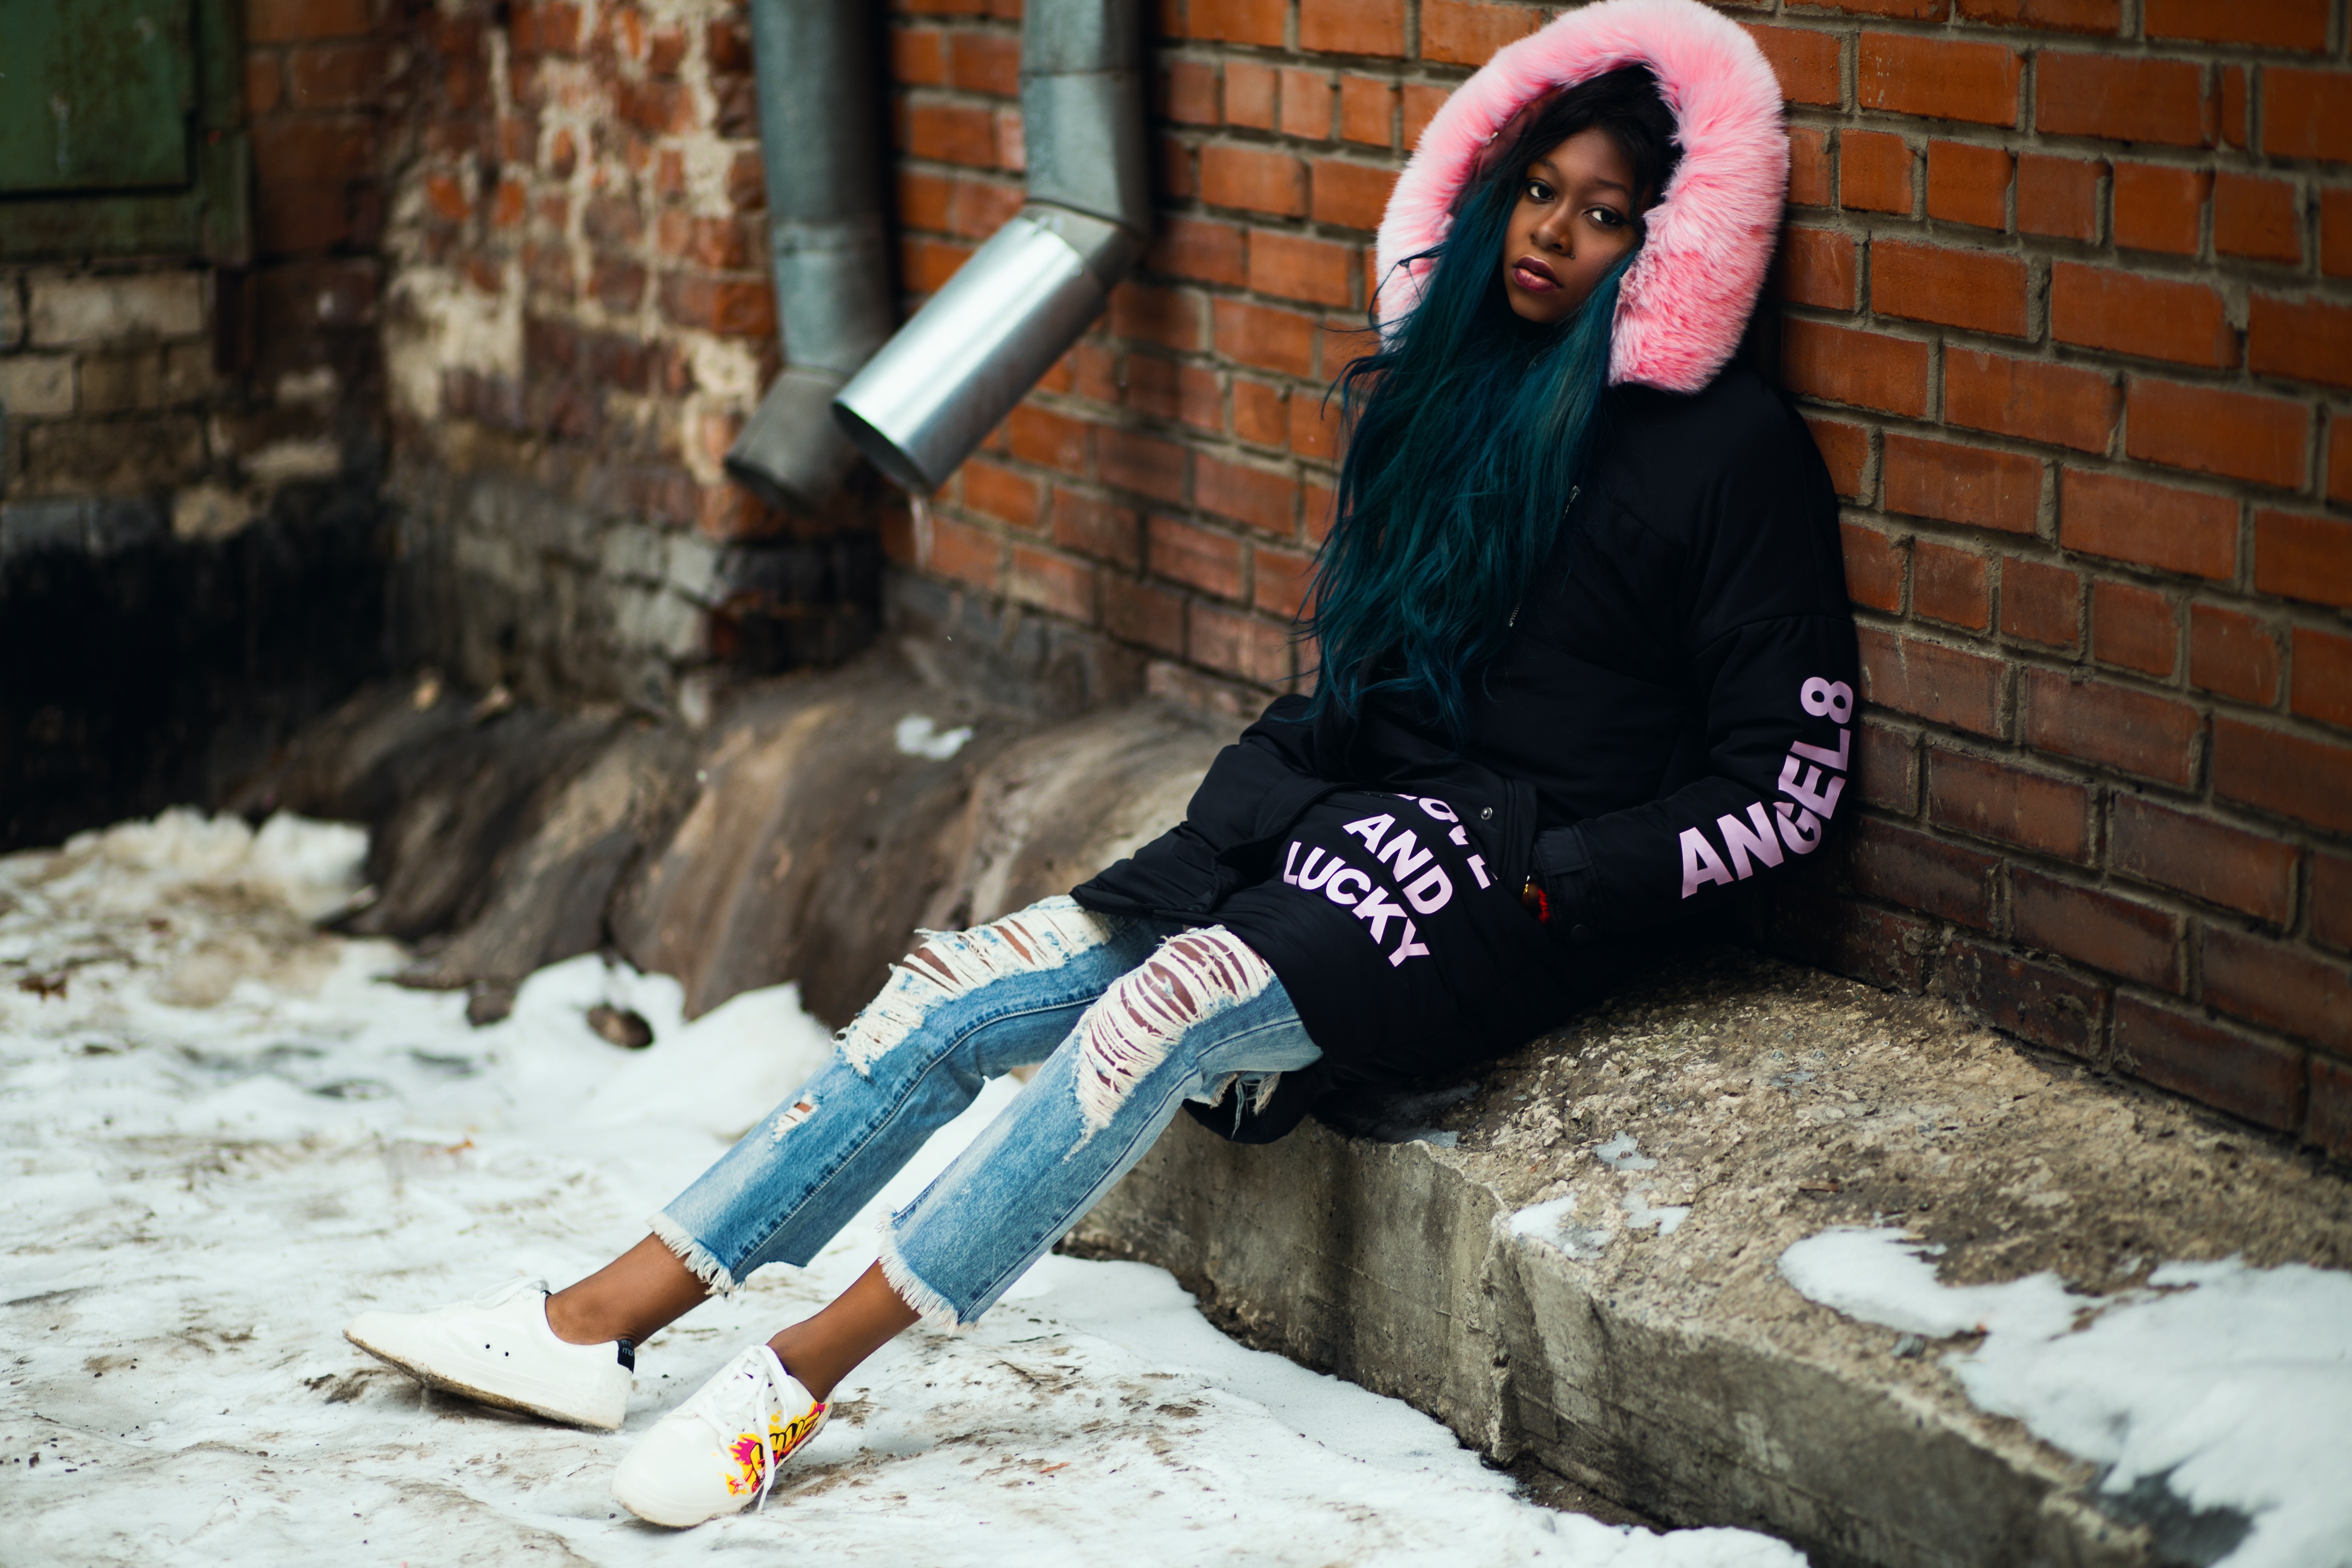 Free photo: Woman Wearing Black and Pink Parka Leaning on Brown Brick ...